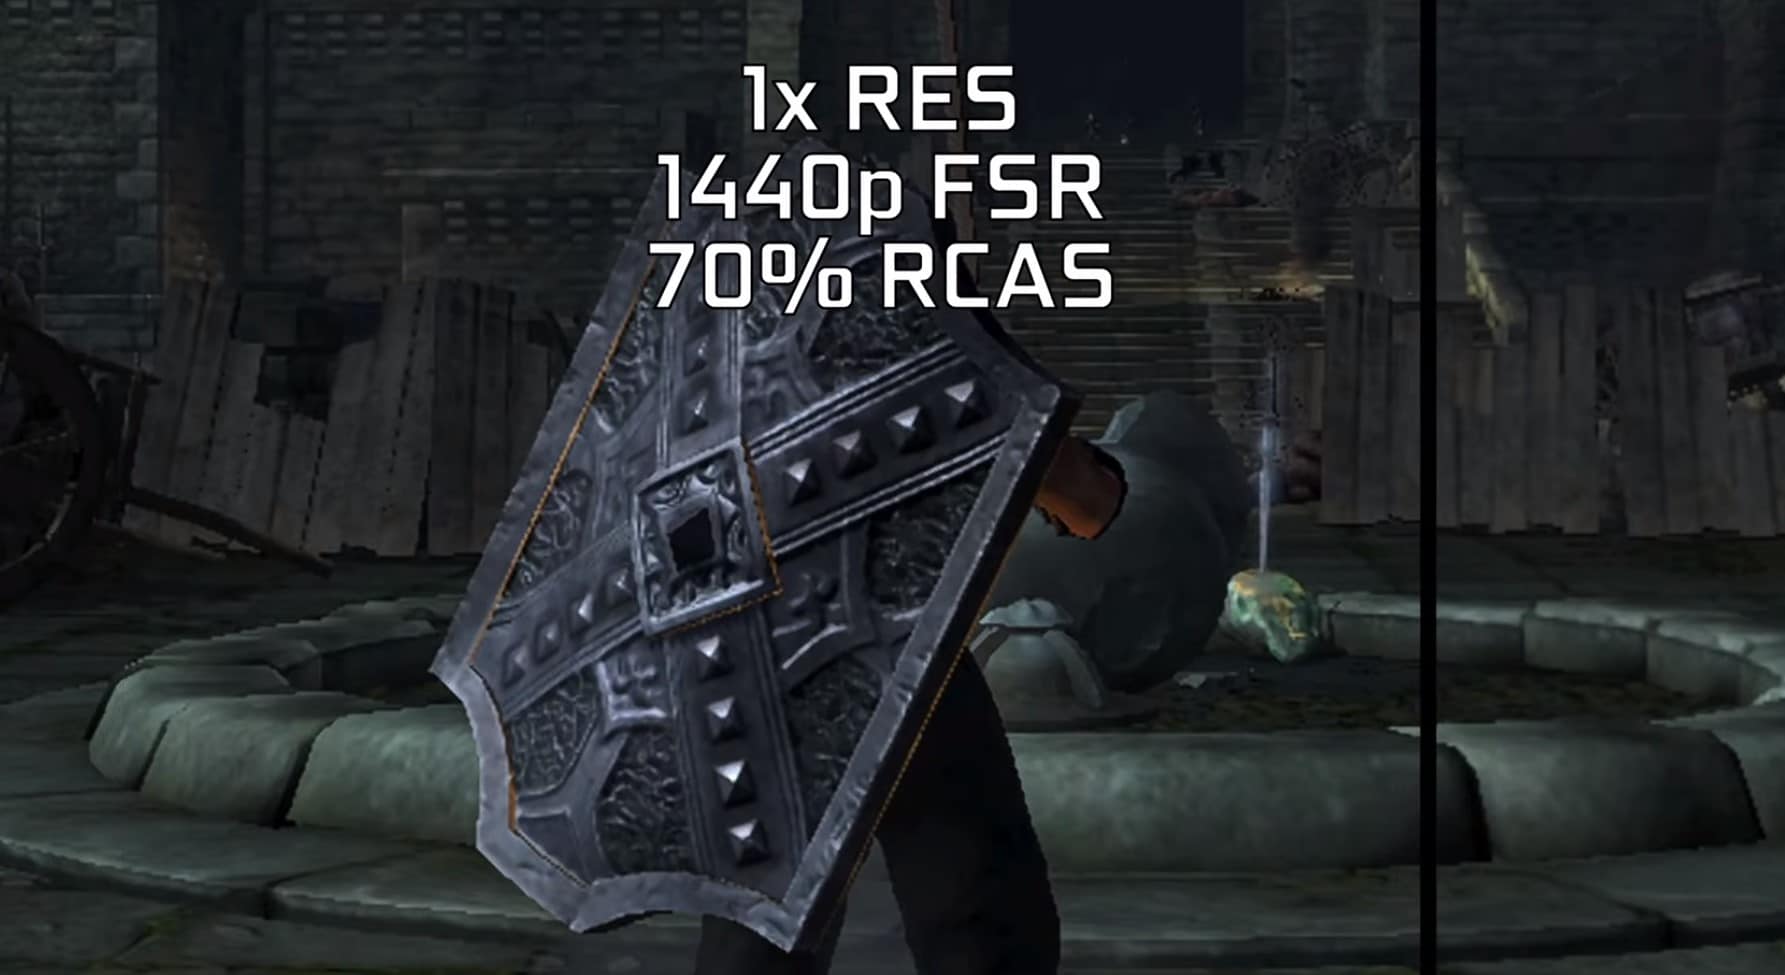 AMD technology will enhance PlayStation 3 games with FSR integration in the RPCS3 emulator